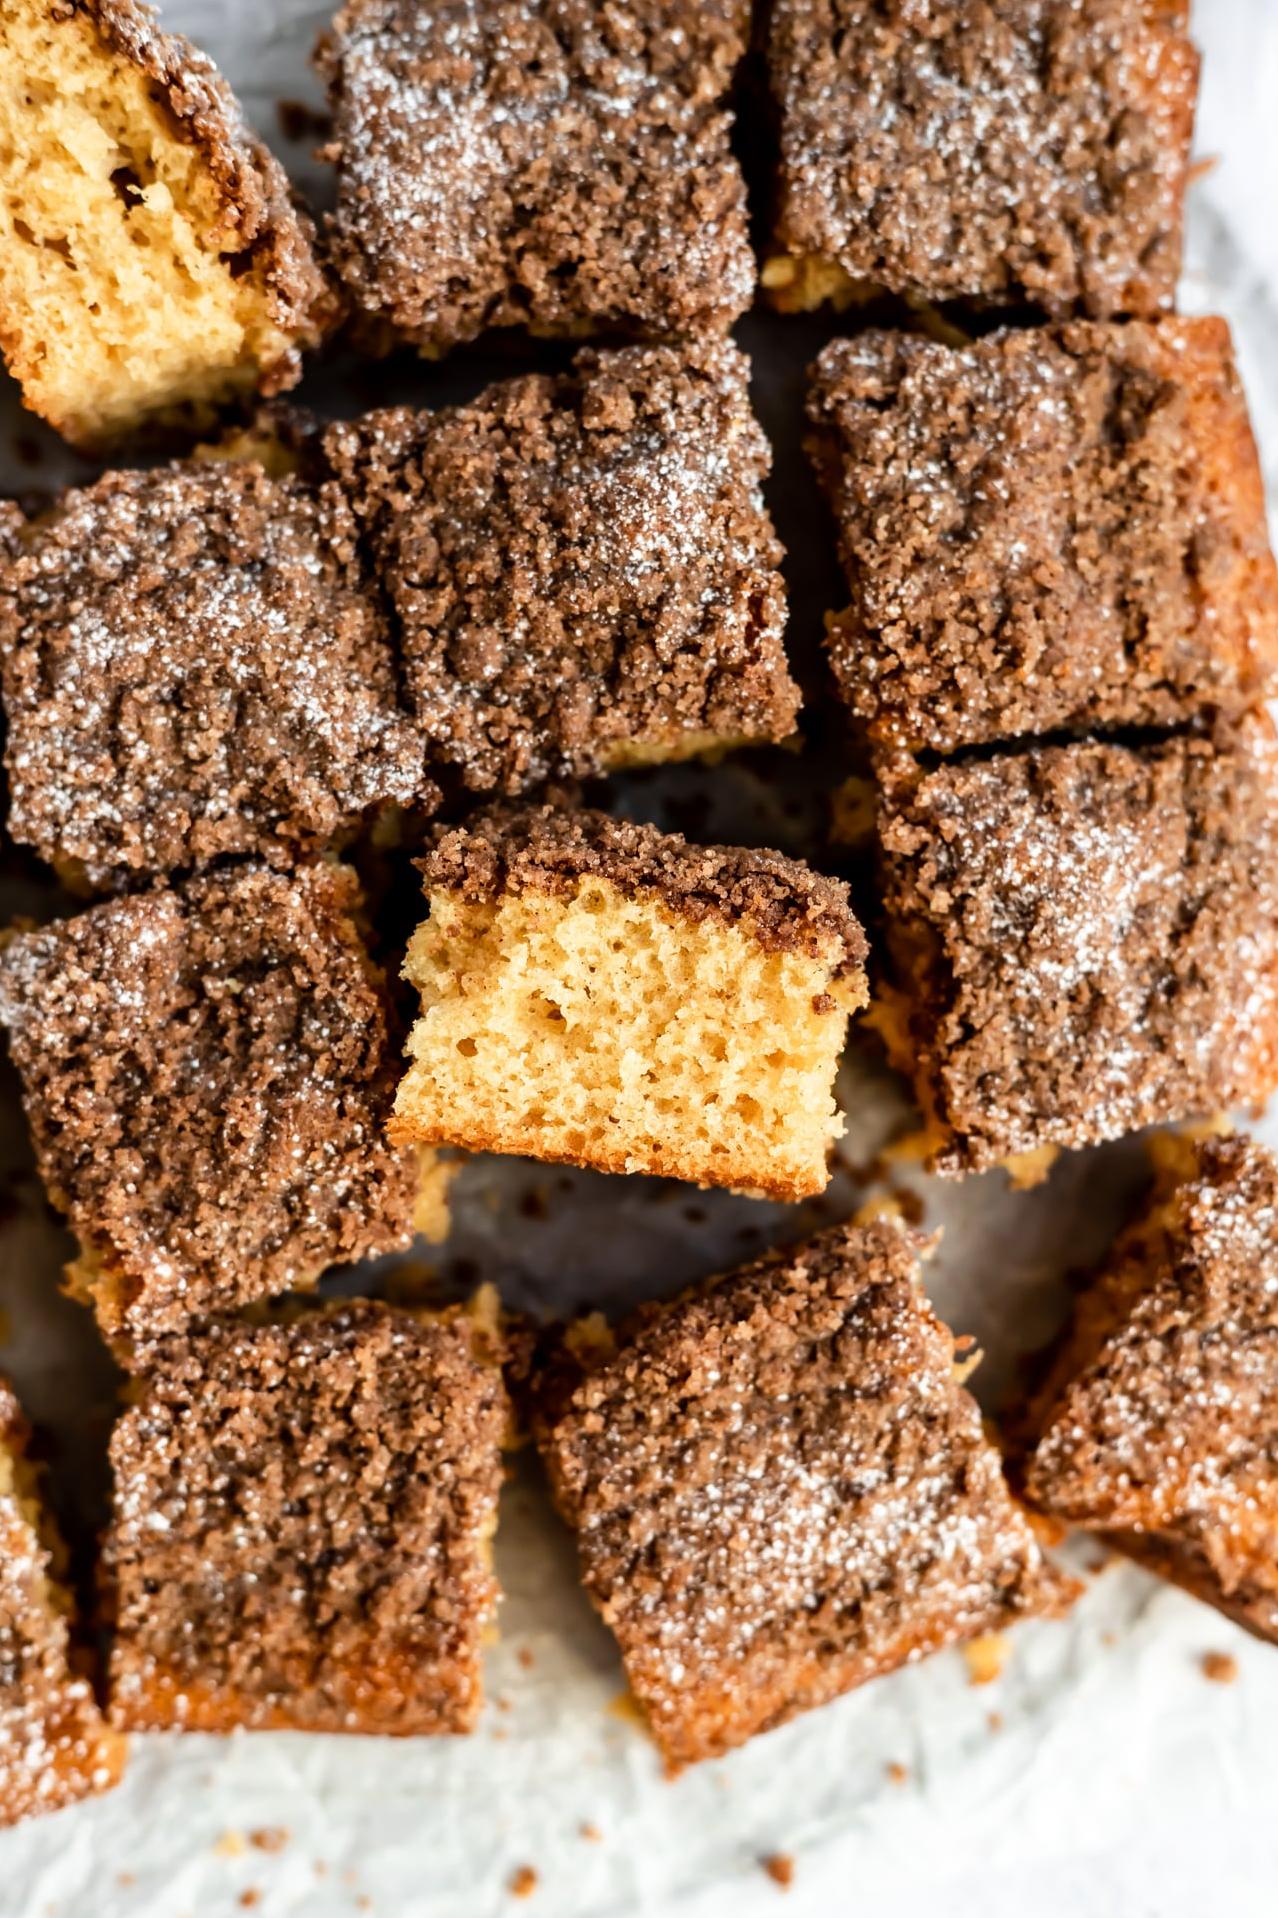  Whip up a batch of this coffee cake for a cozy afternoon treat.